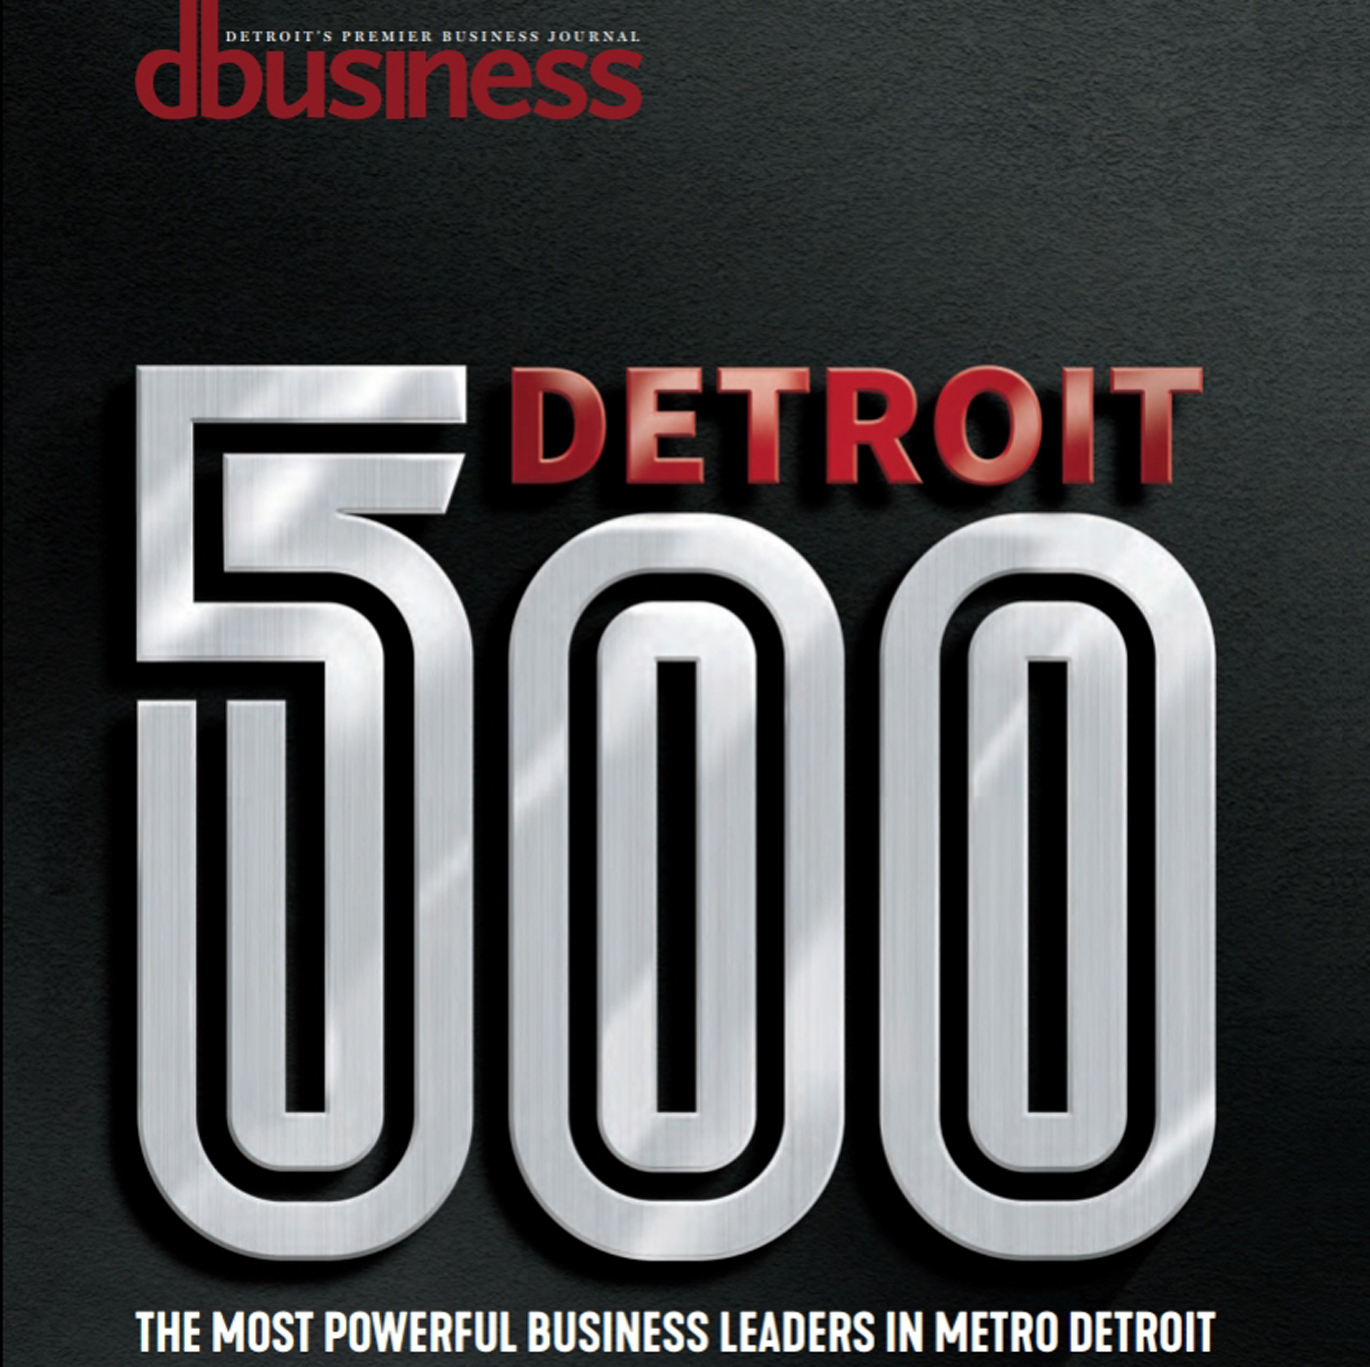 Frank Torre named among the Most Powerful Business Leaders in Metro Detroit for 5th Year